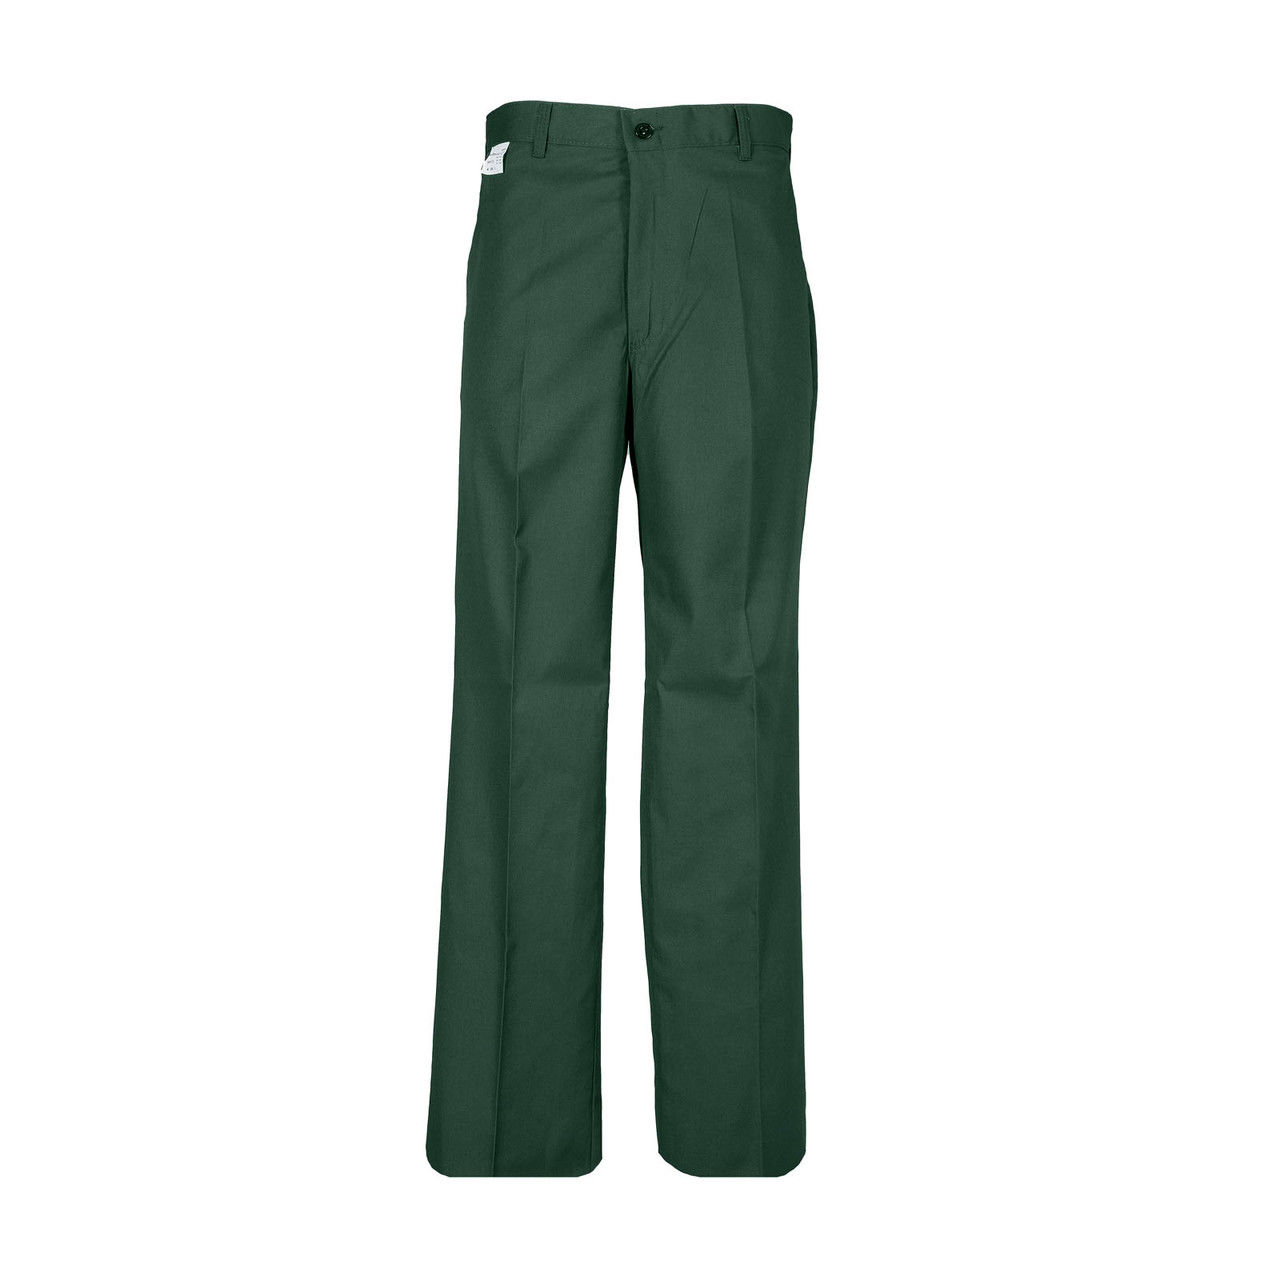 What is the fabric used for these green work pants?